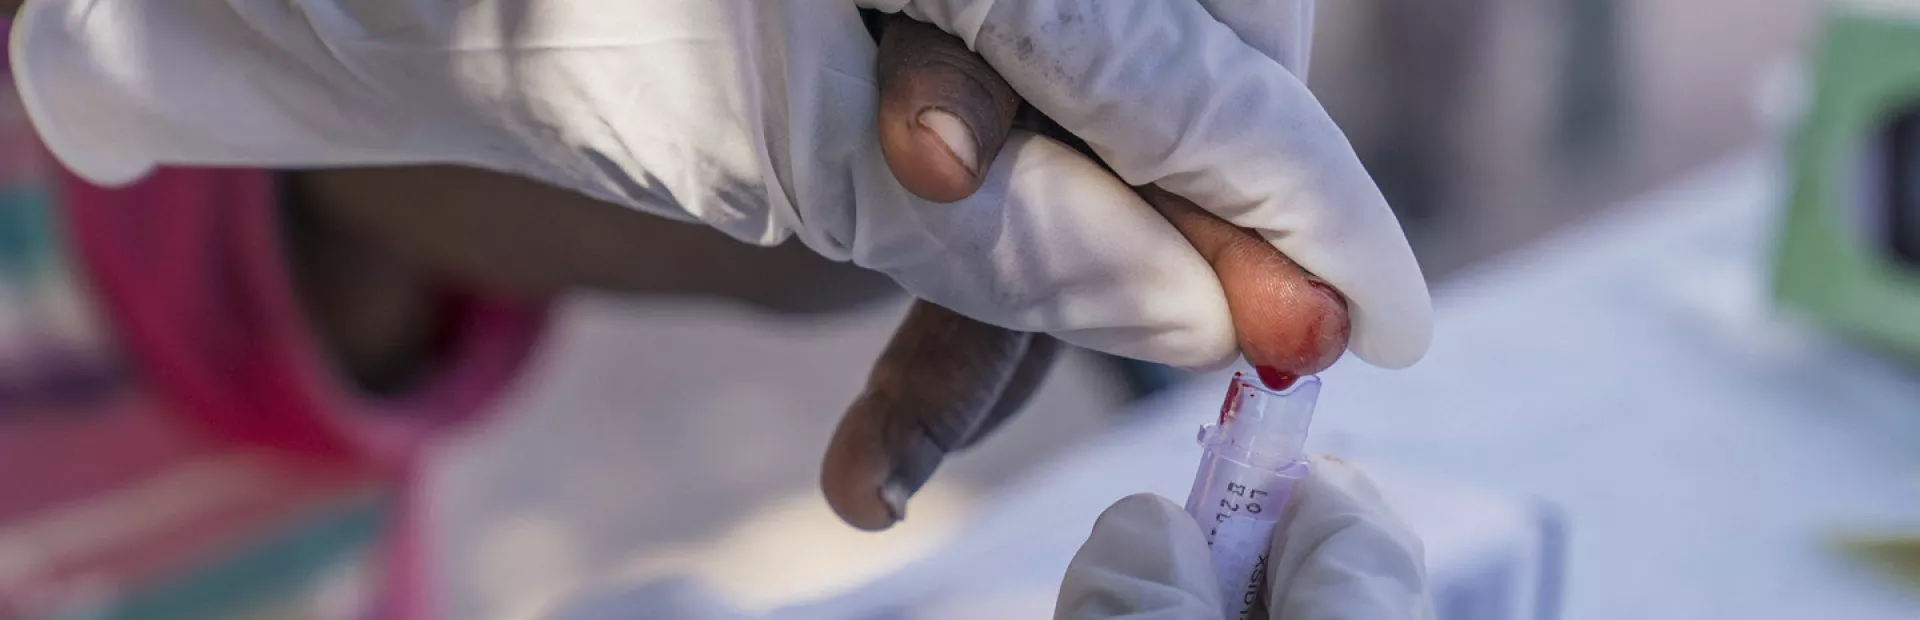 Testing of a child for malaria in Namibia by taking blood from the child's finger tip